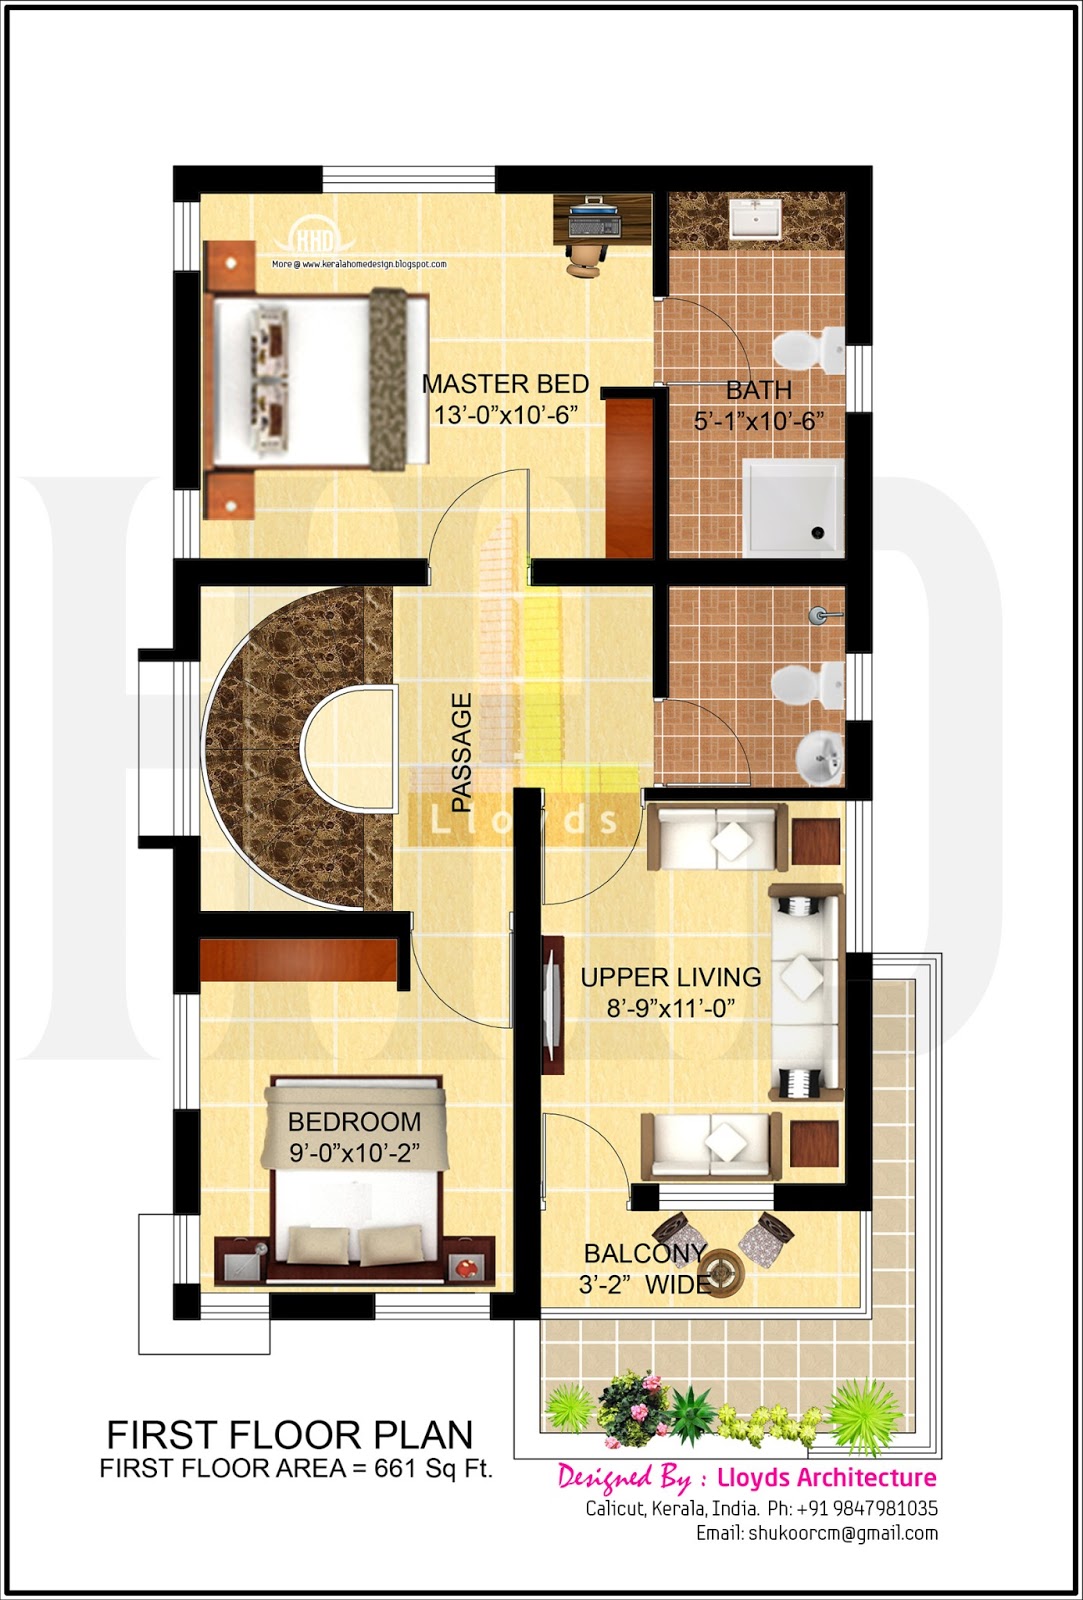  4  bedroom  house  plan  in less that 3 cents Home  Kerala  Plans 